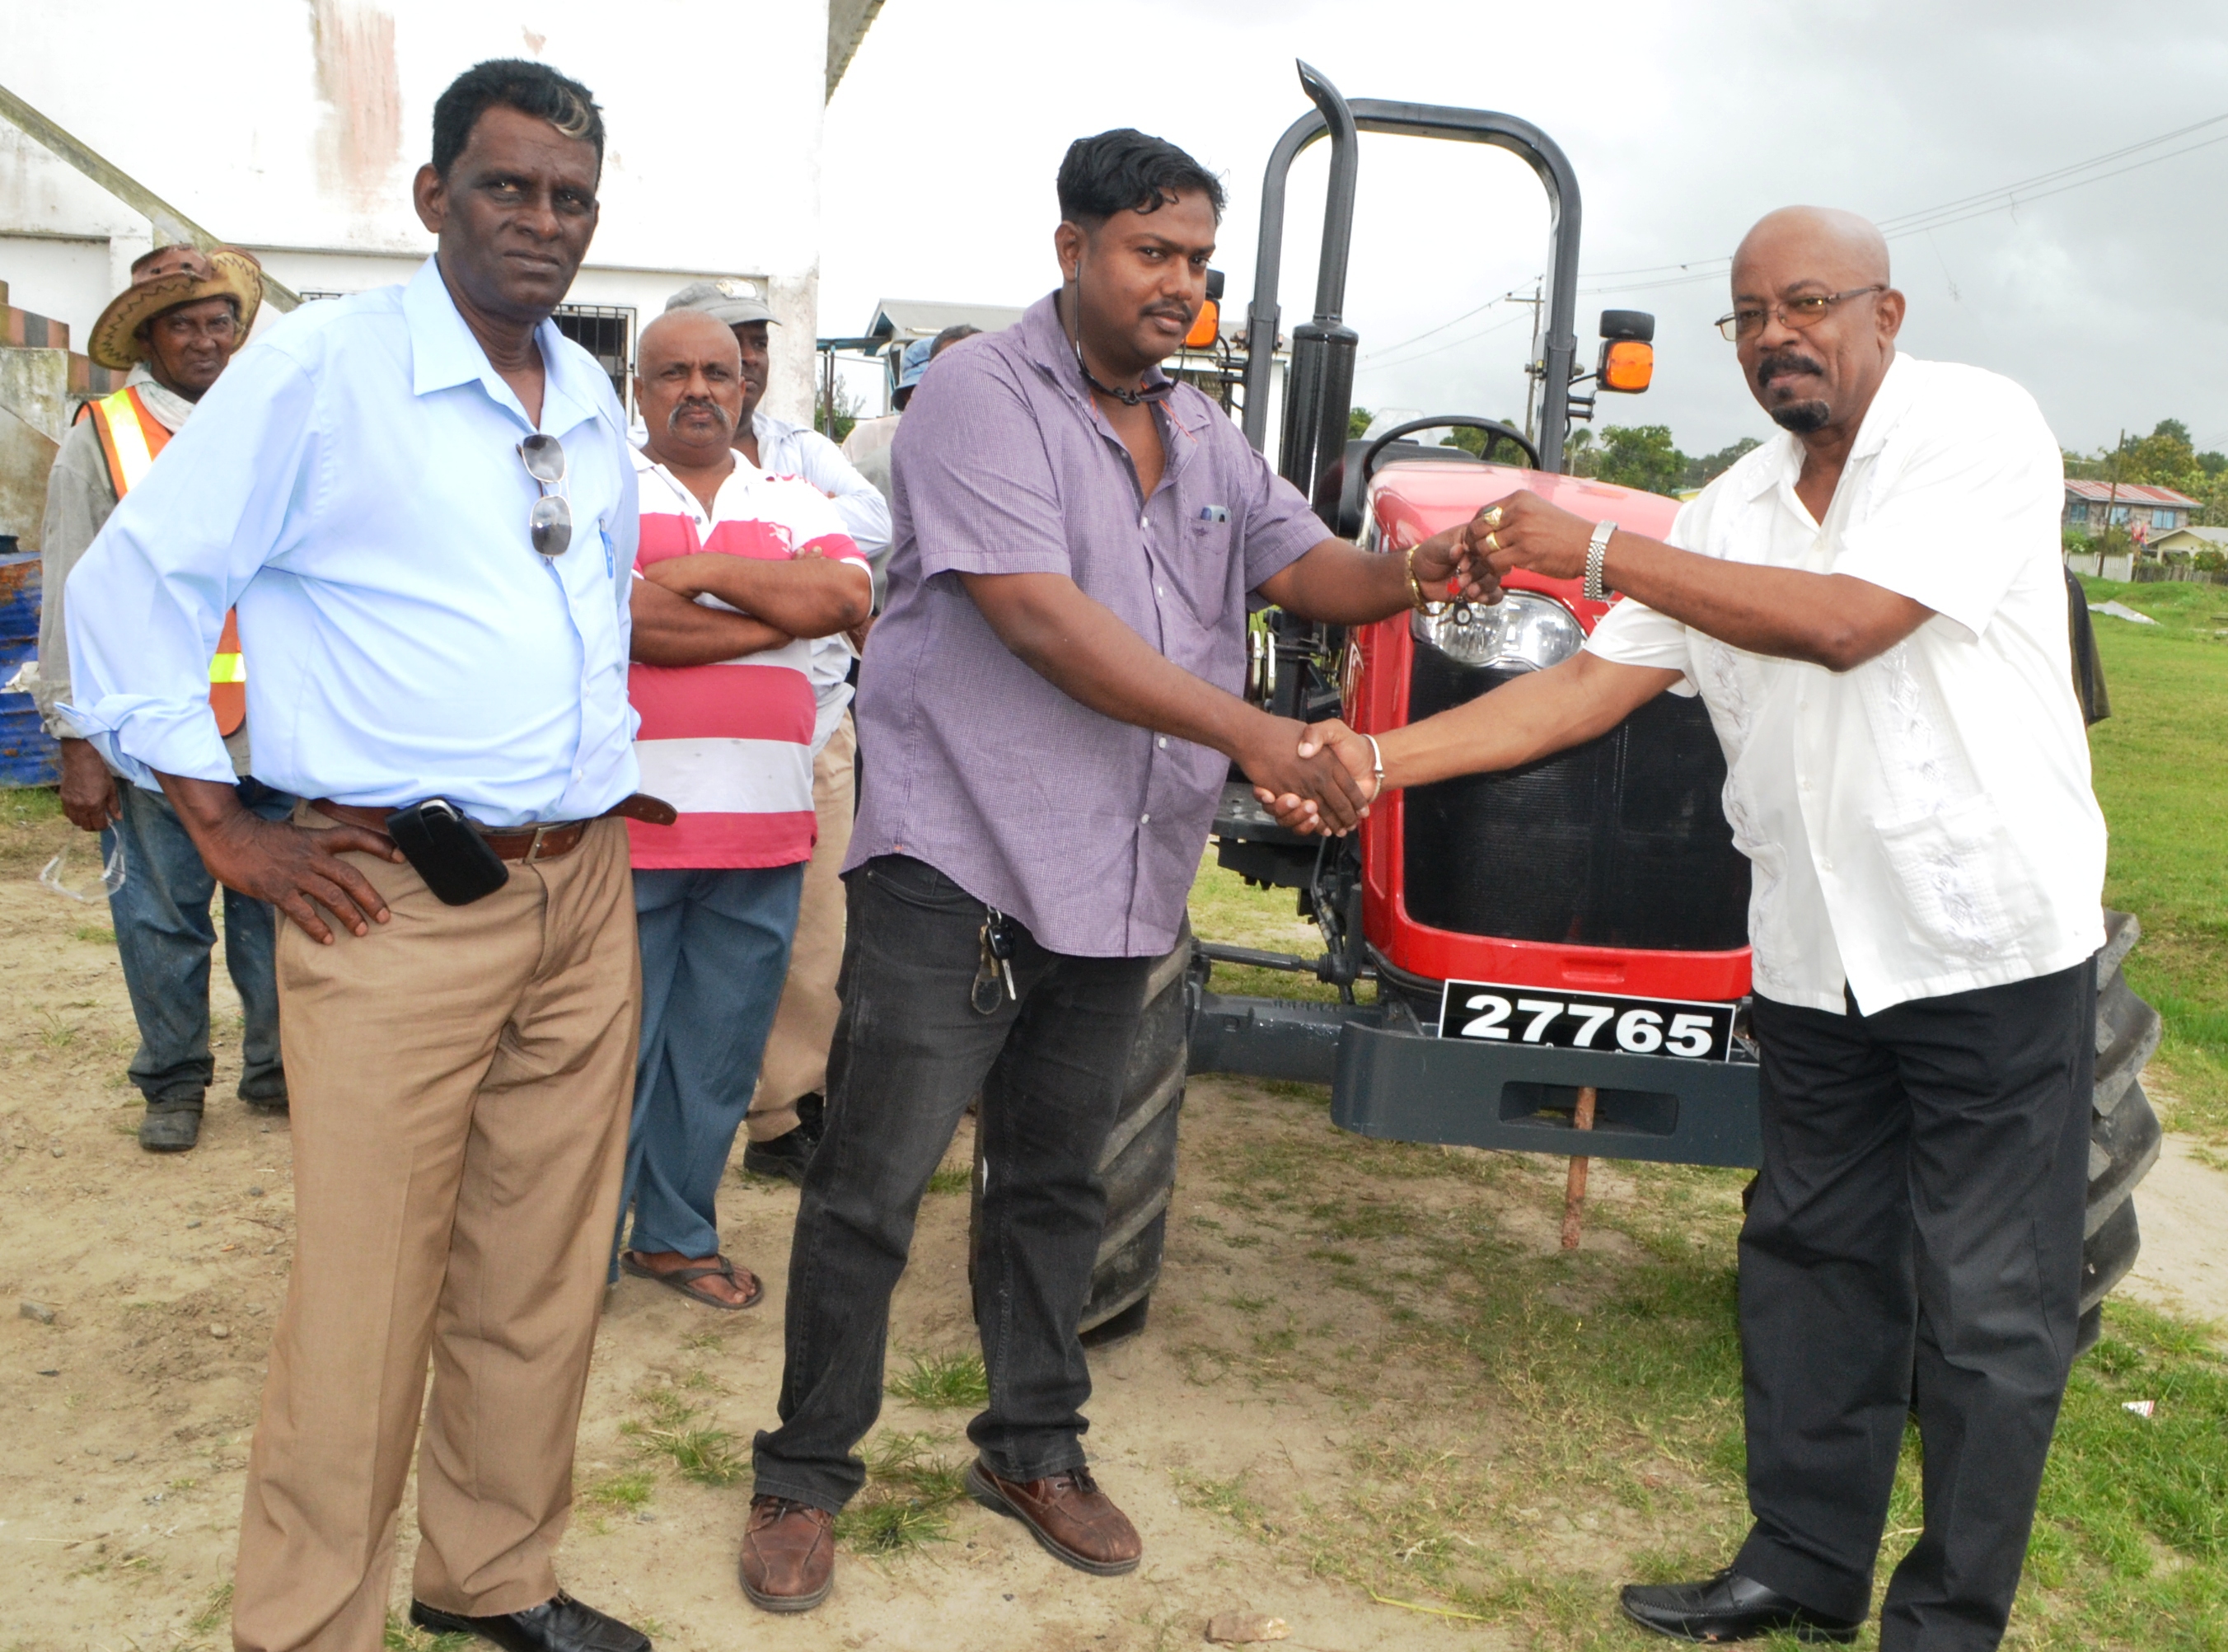 Minister of Local Government and Regional Development, Norman Whittaker after handing over the keys to the representatives of the Diamond/Herstelling NDC explained that this NDC has been one of the most proactive in Region 4.